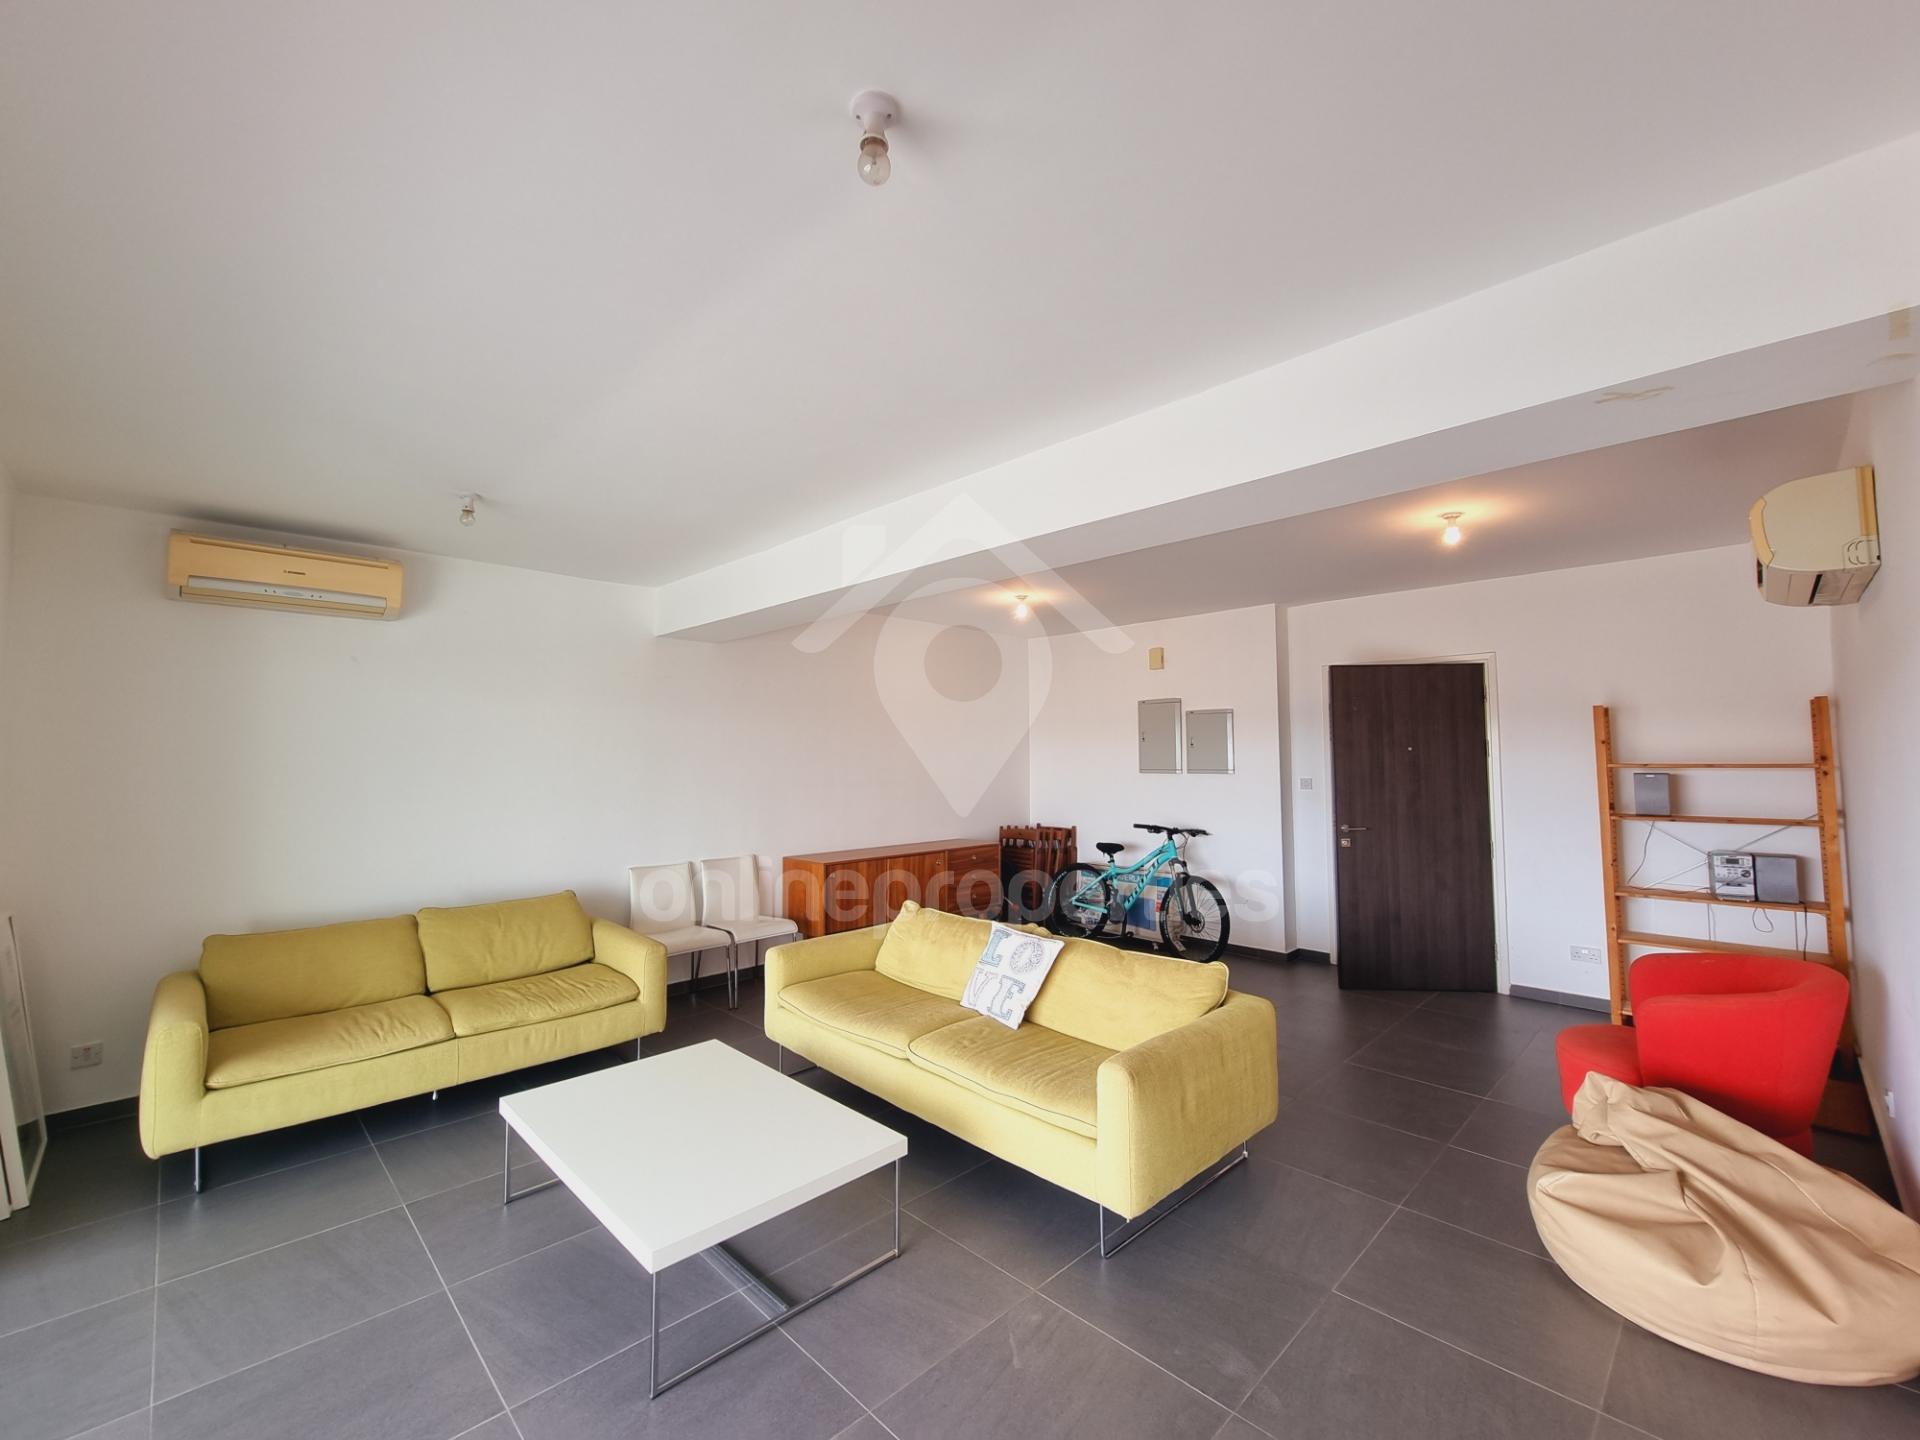 Centrally located 2-bedroom flat near the city center